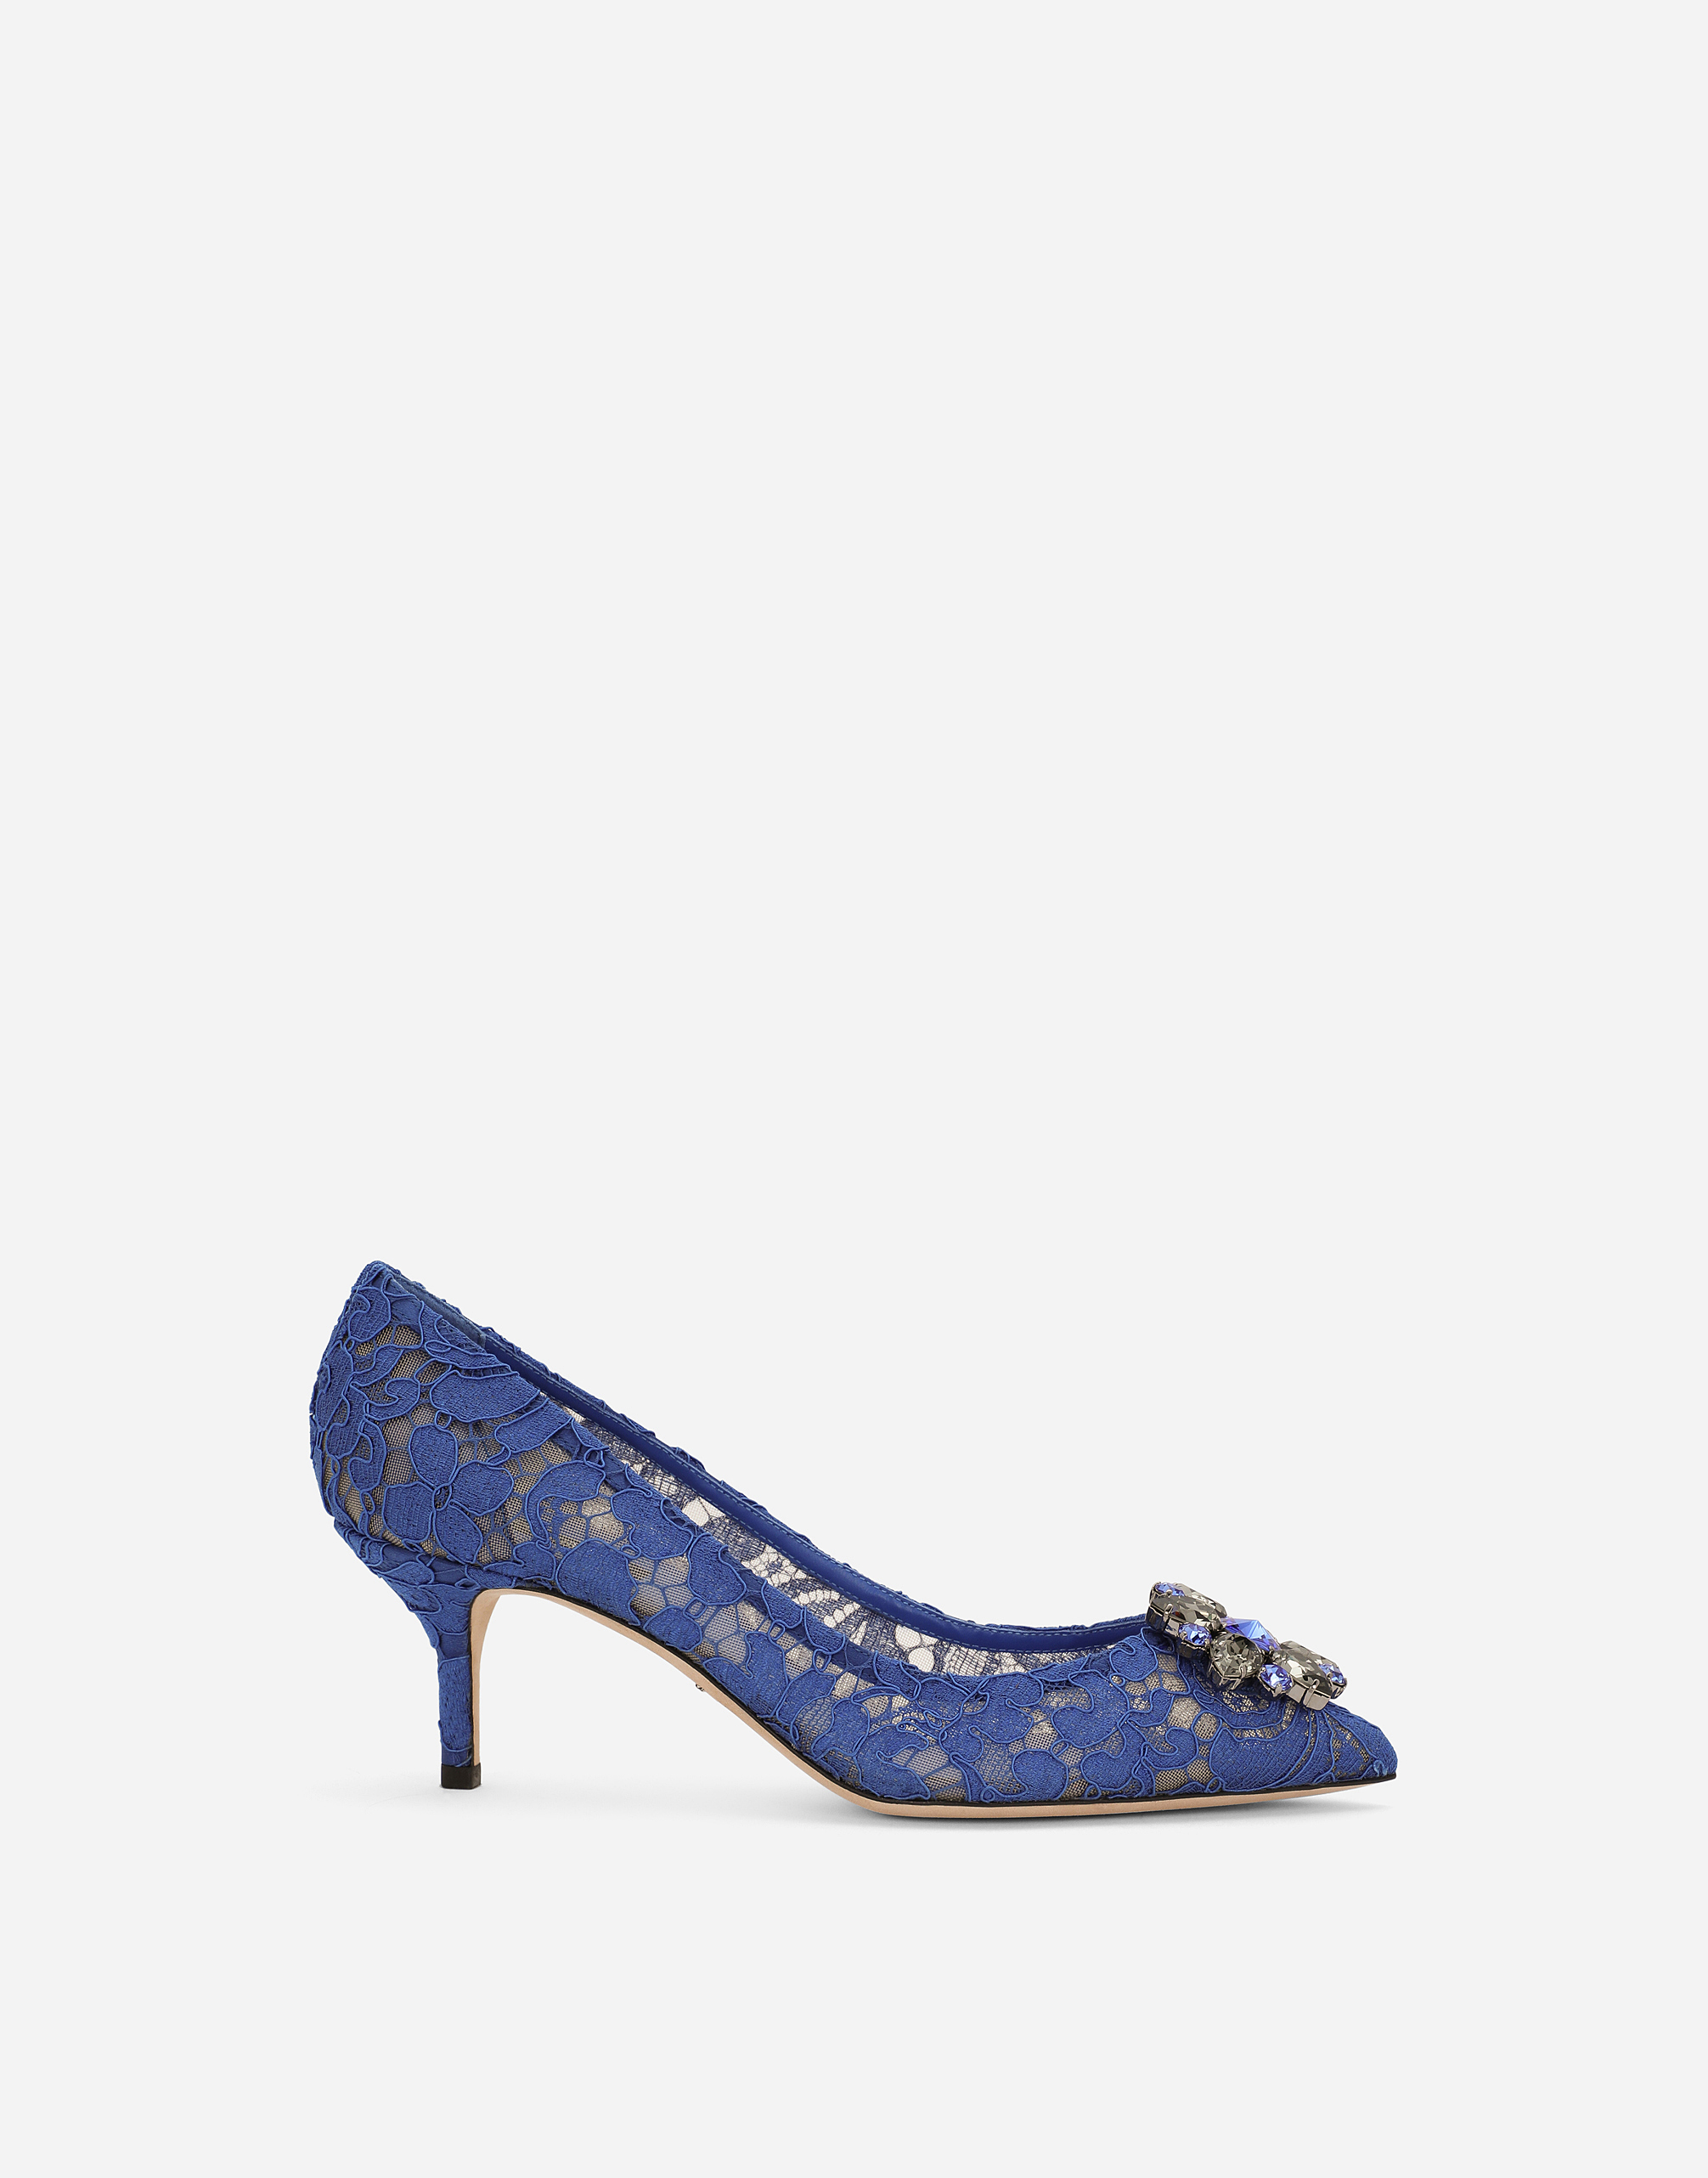 Lace rainbow pumps with brooch detailing in Blue